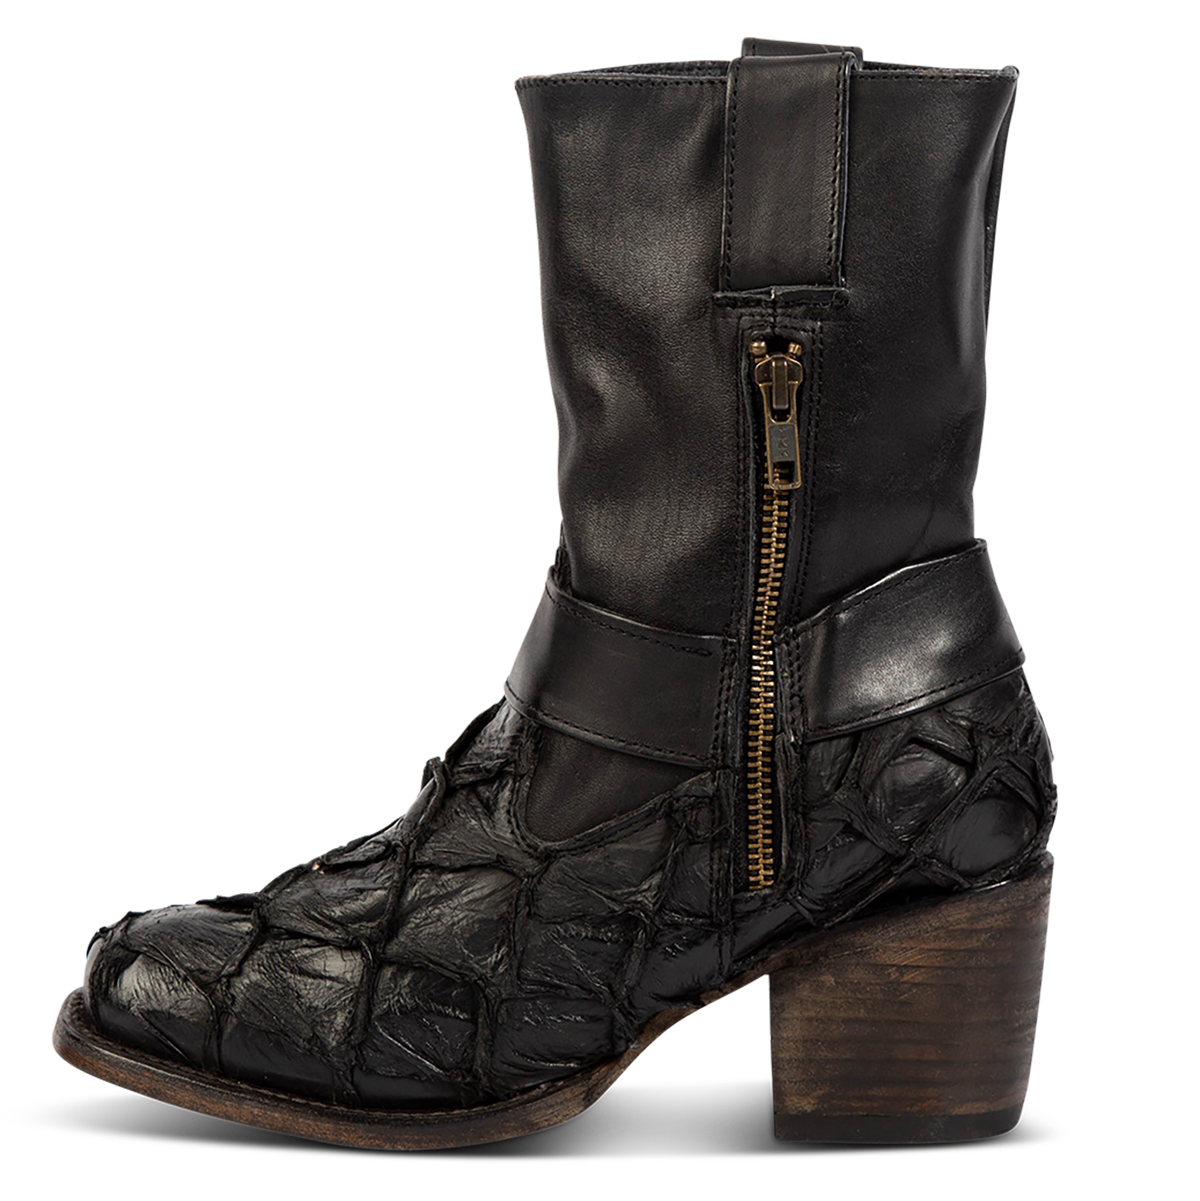 Inside view showing FREEBIRD women's Darcy black fish leather boot with a studded ankle harness, leather pull straps, an inside zip closure and a square toe